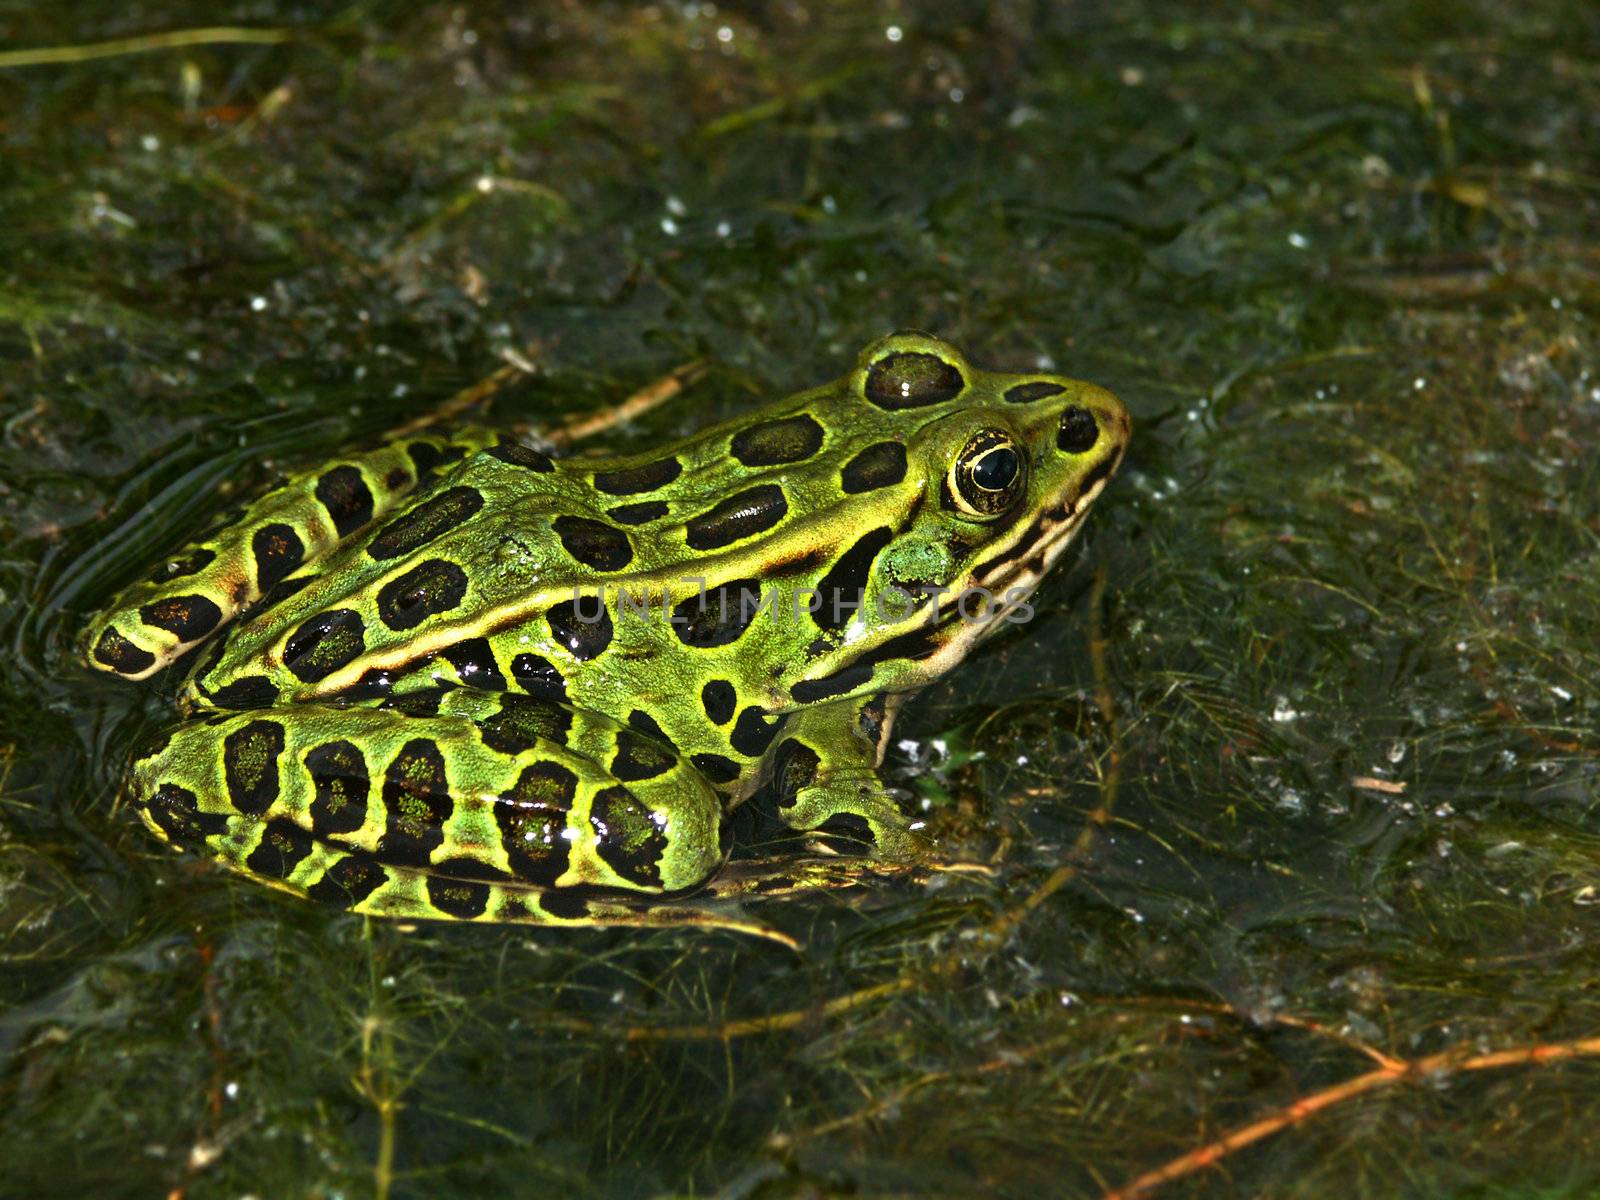 Northern Leopard Frog (Rana pipiens) by Wirepec